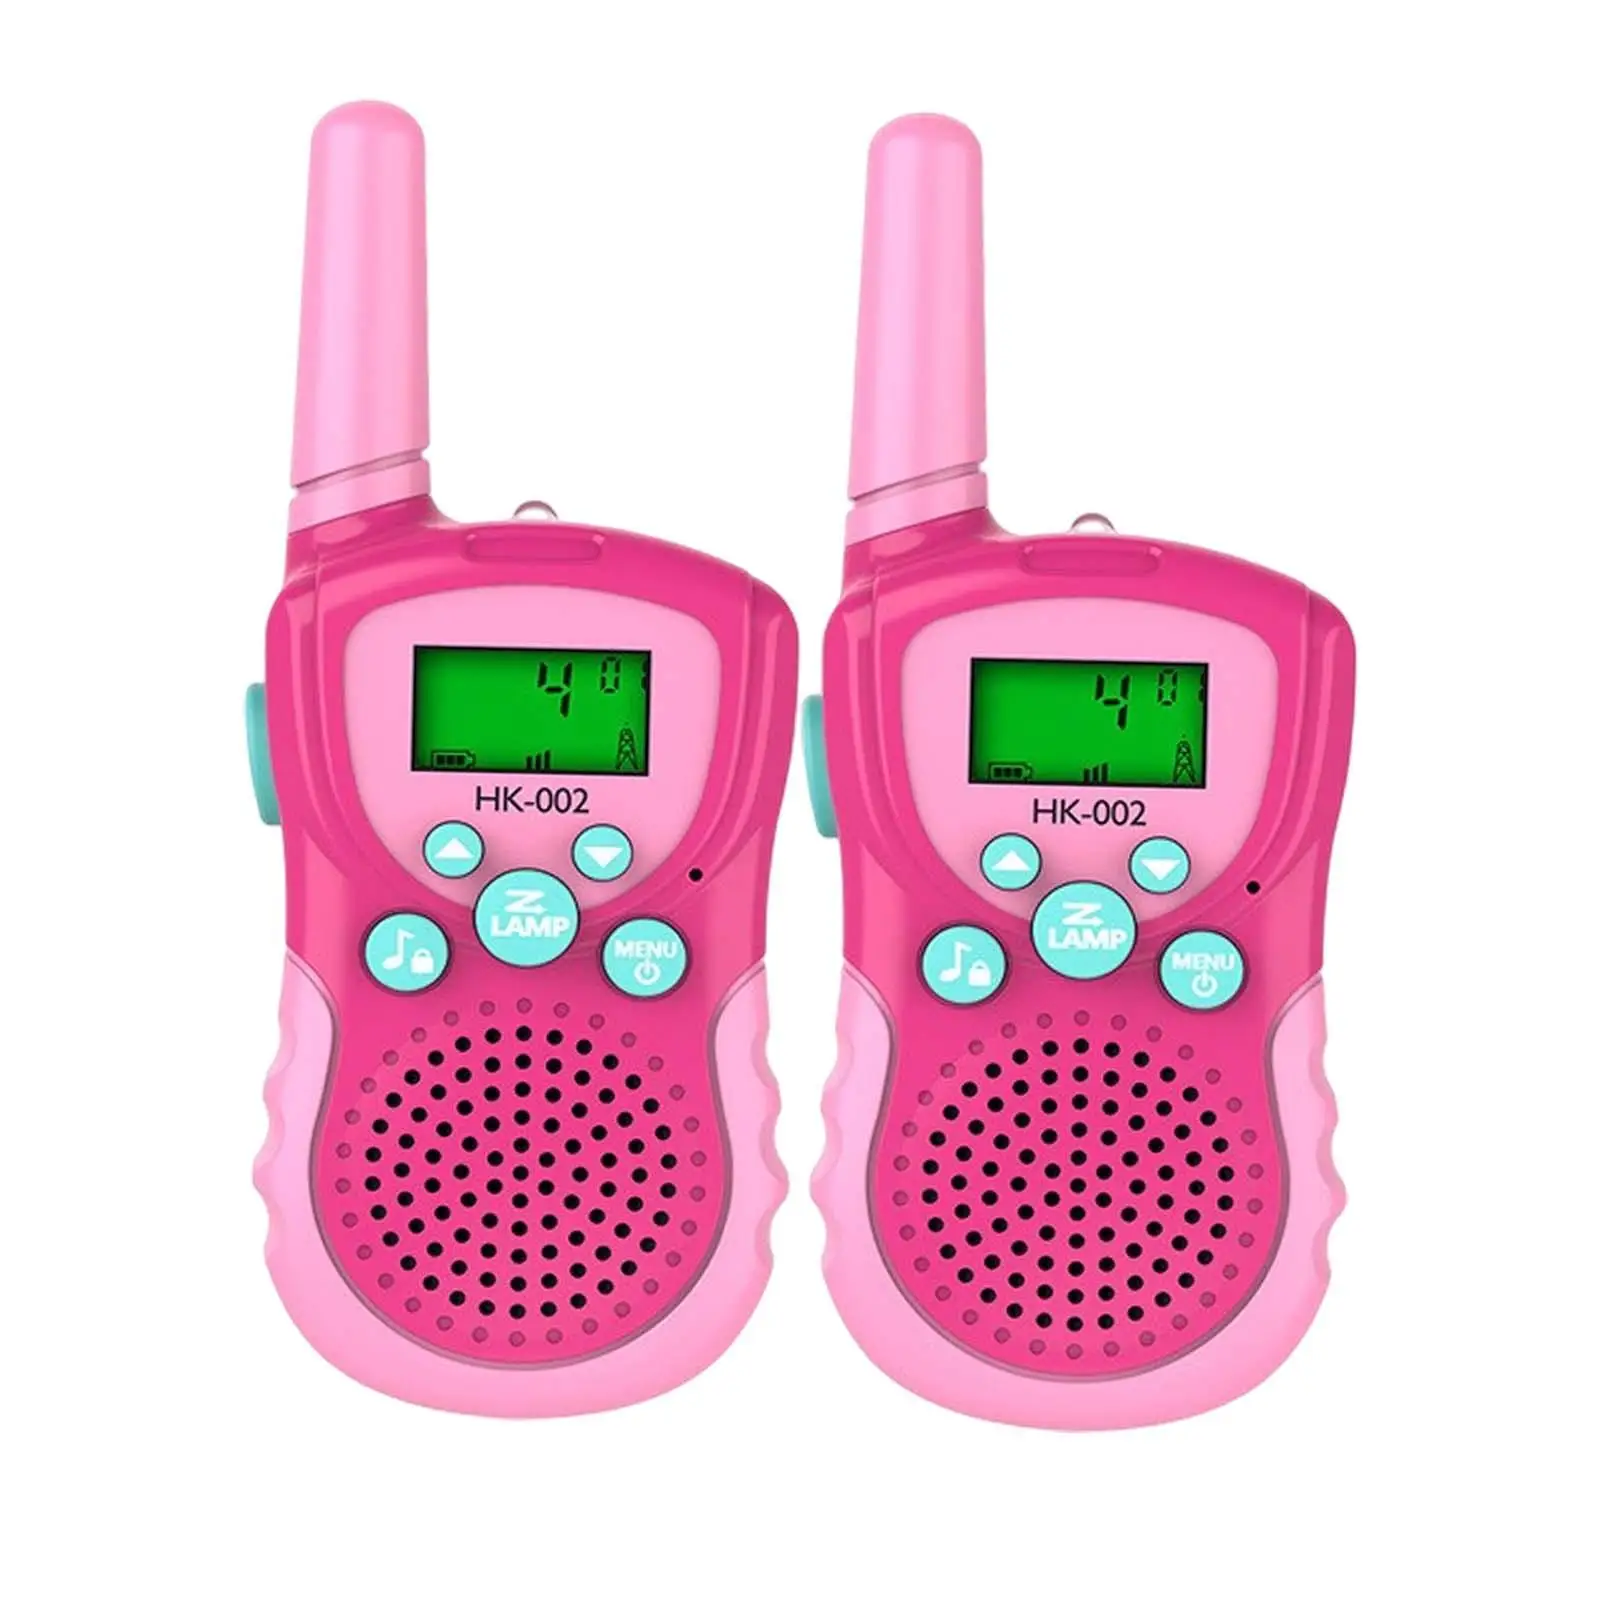 

2x Walkie Talkies for Kids Birthday Gift 2km Range Easy to Use Outdoor Toy for 3-12 Years Old Outdoor Hiking Indoor Boys Girls